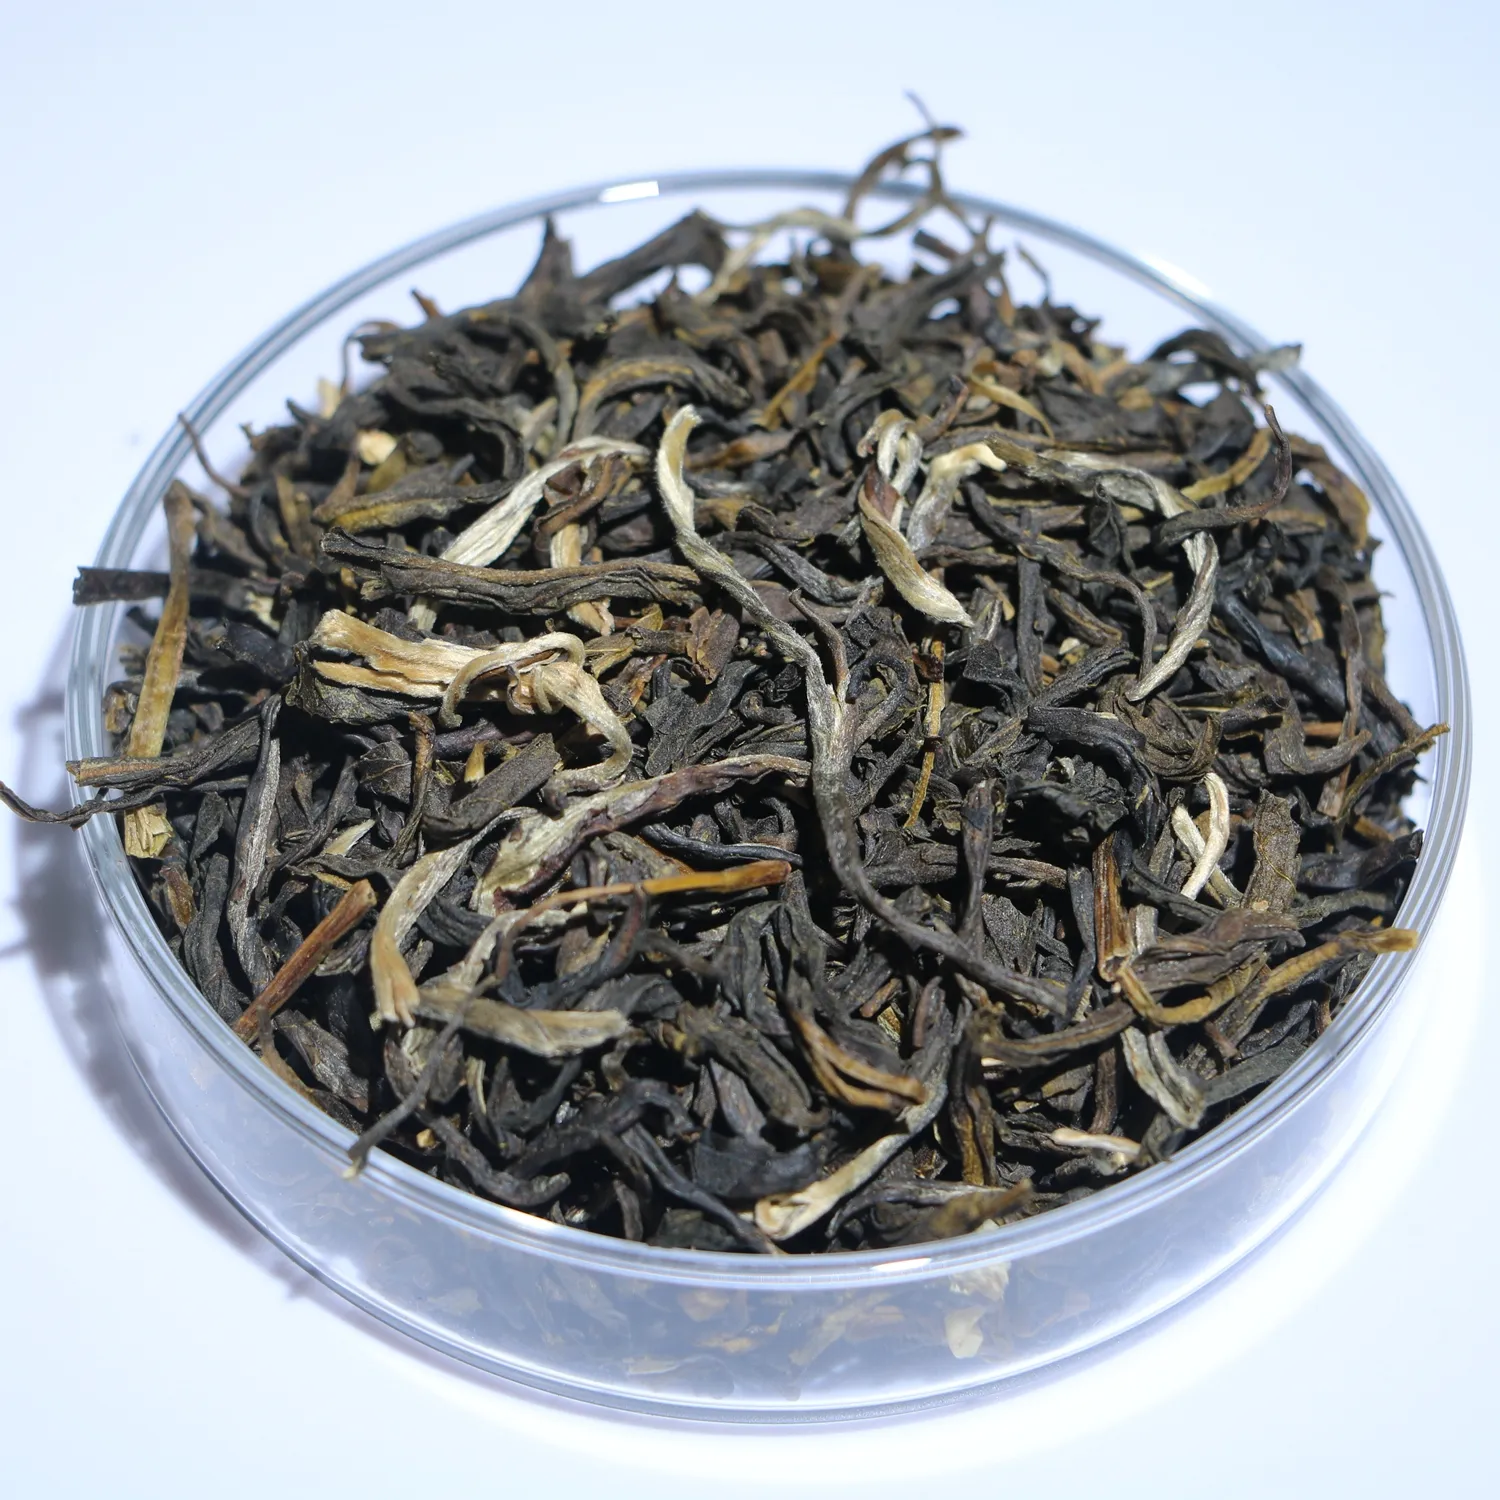 Hot Sell Organic Herbal Flower Tea Natural Flavor and Color Relax Jasmine Green Tea